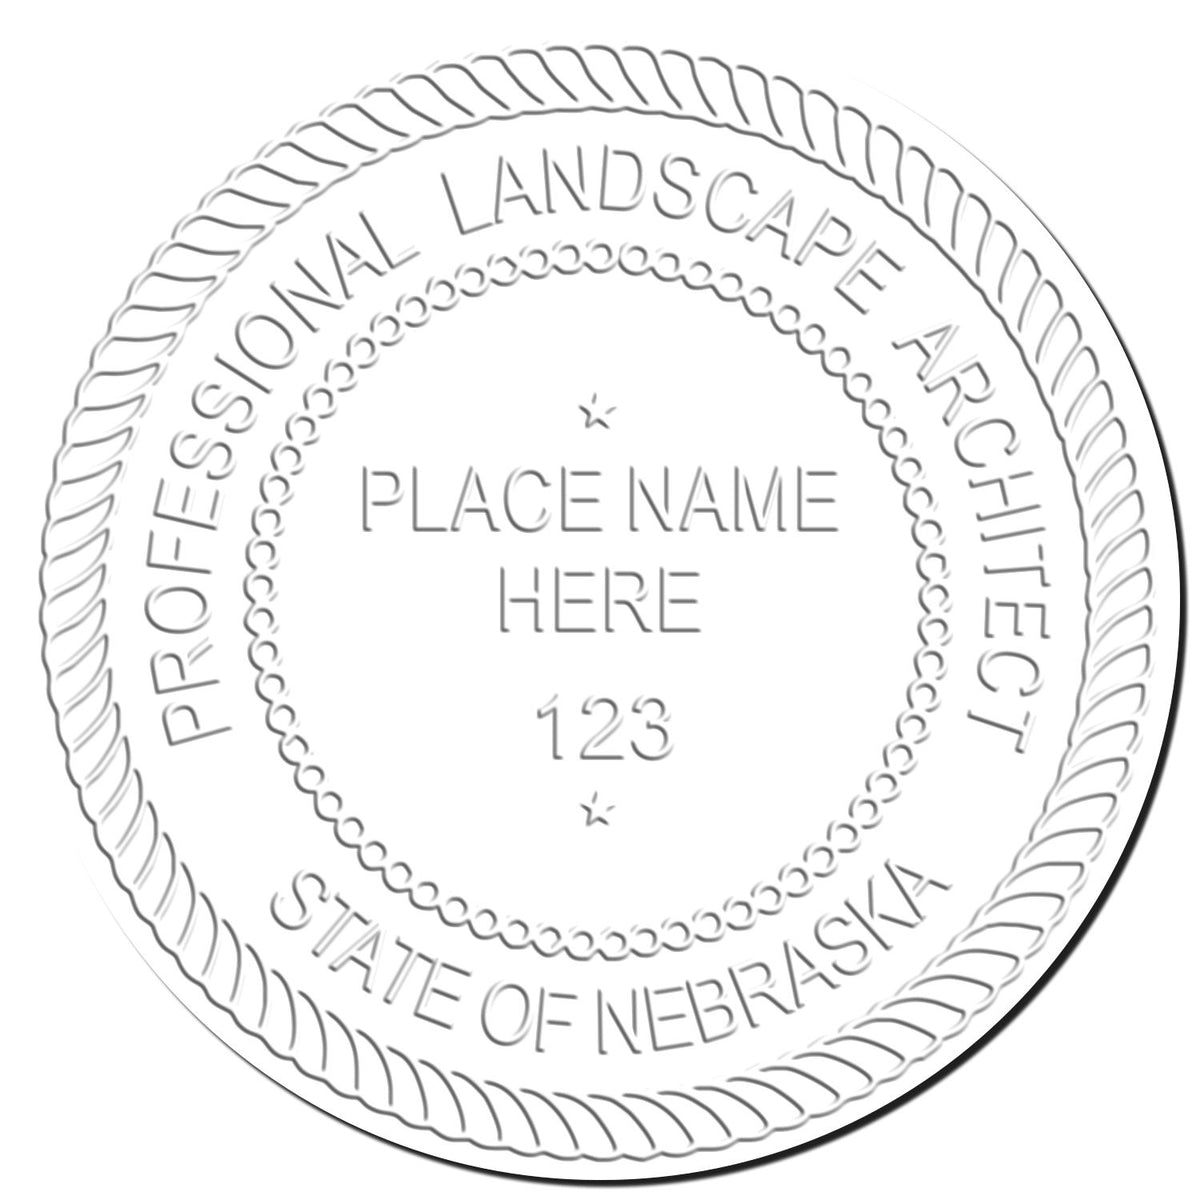 This paper is stamped with a sample imprint of the Gift Nebraska Landscape Architect Seal, signifying its quality and reliability.